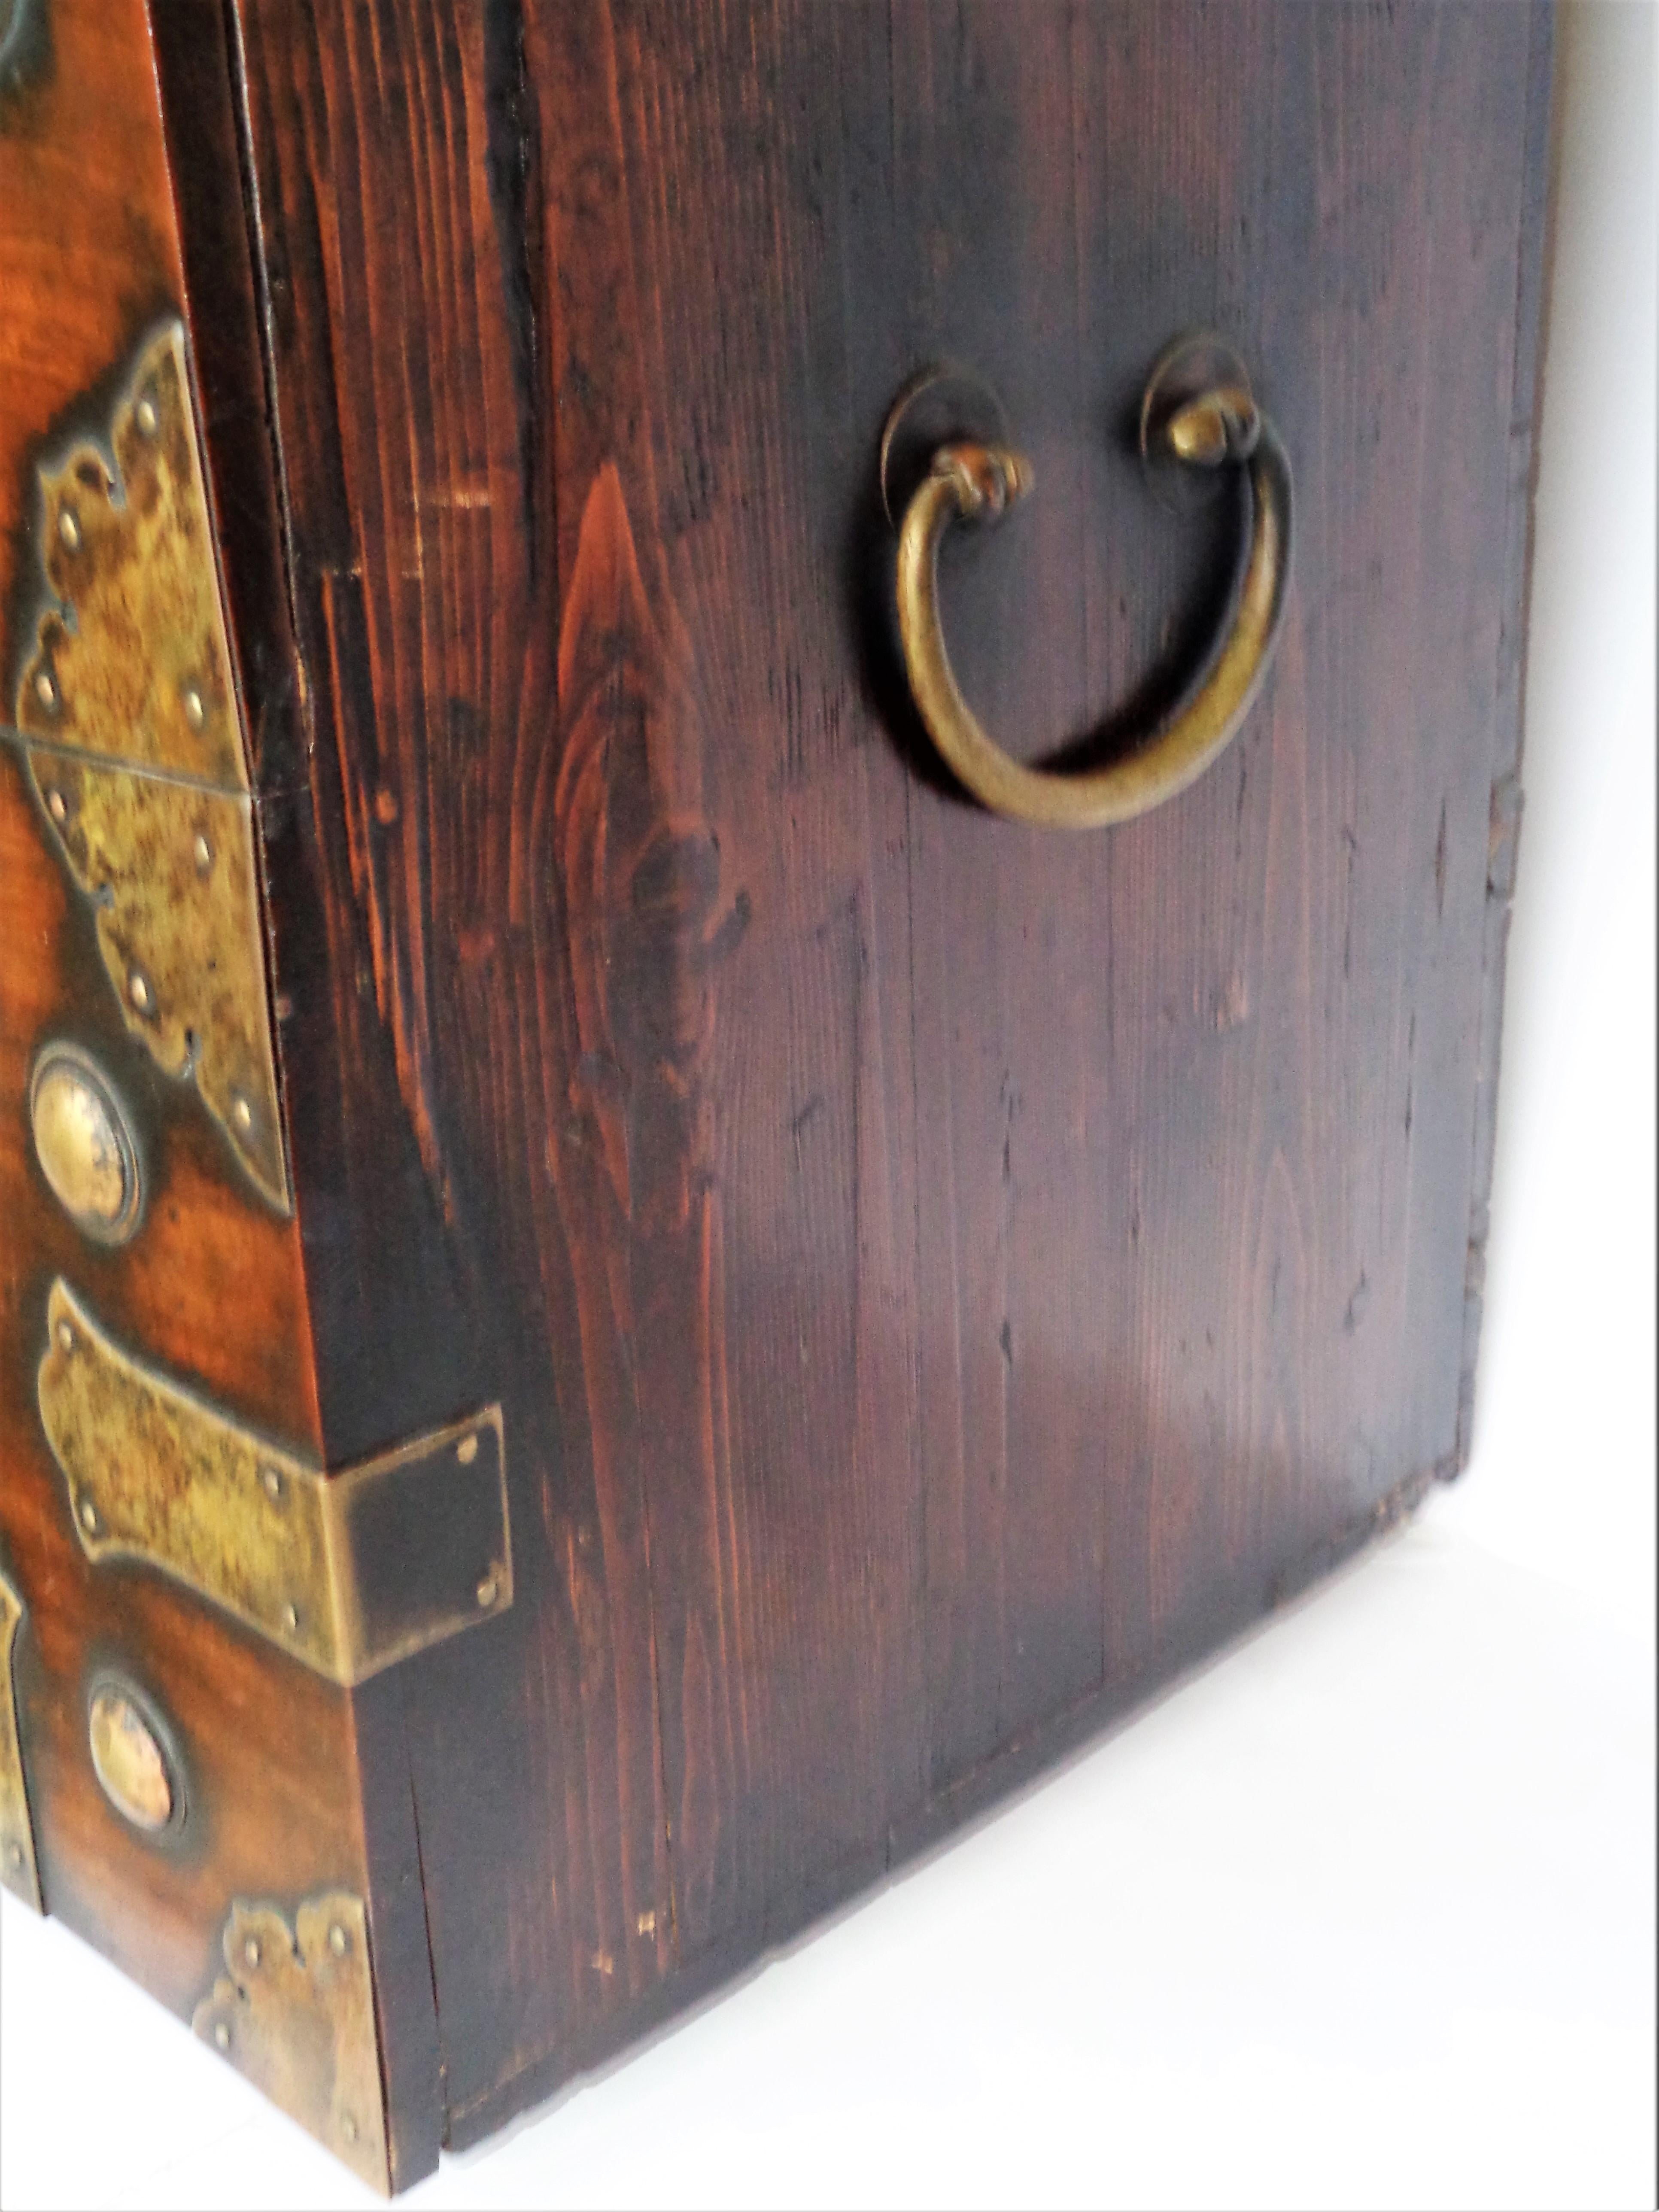 Antique 19th century Korean tansu ( drop front bandaji tansu chest ) in overall beautifully aged rich glowing color patina to the well figured elm wood and the finely decorated  hand wrought brass mountings. Look at all pictures and read condition